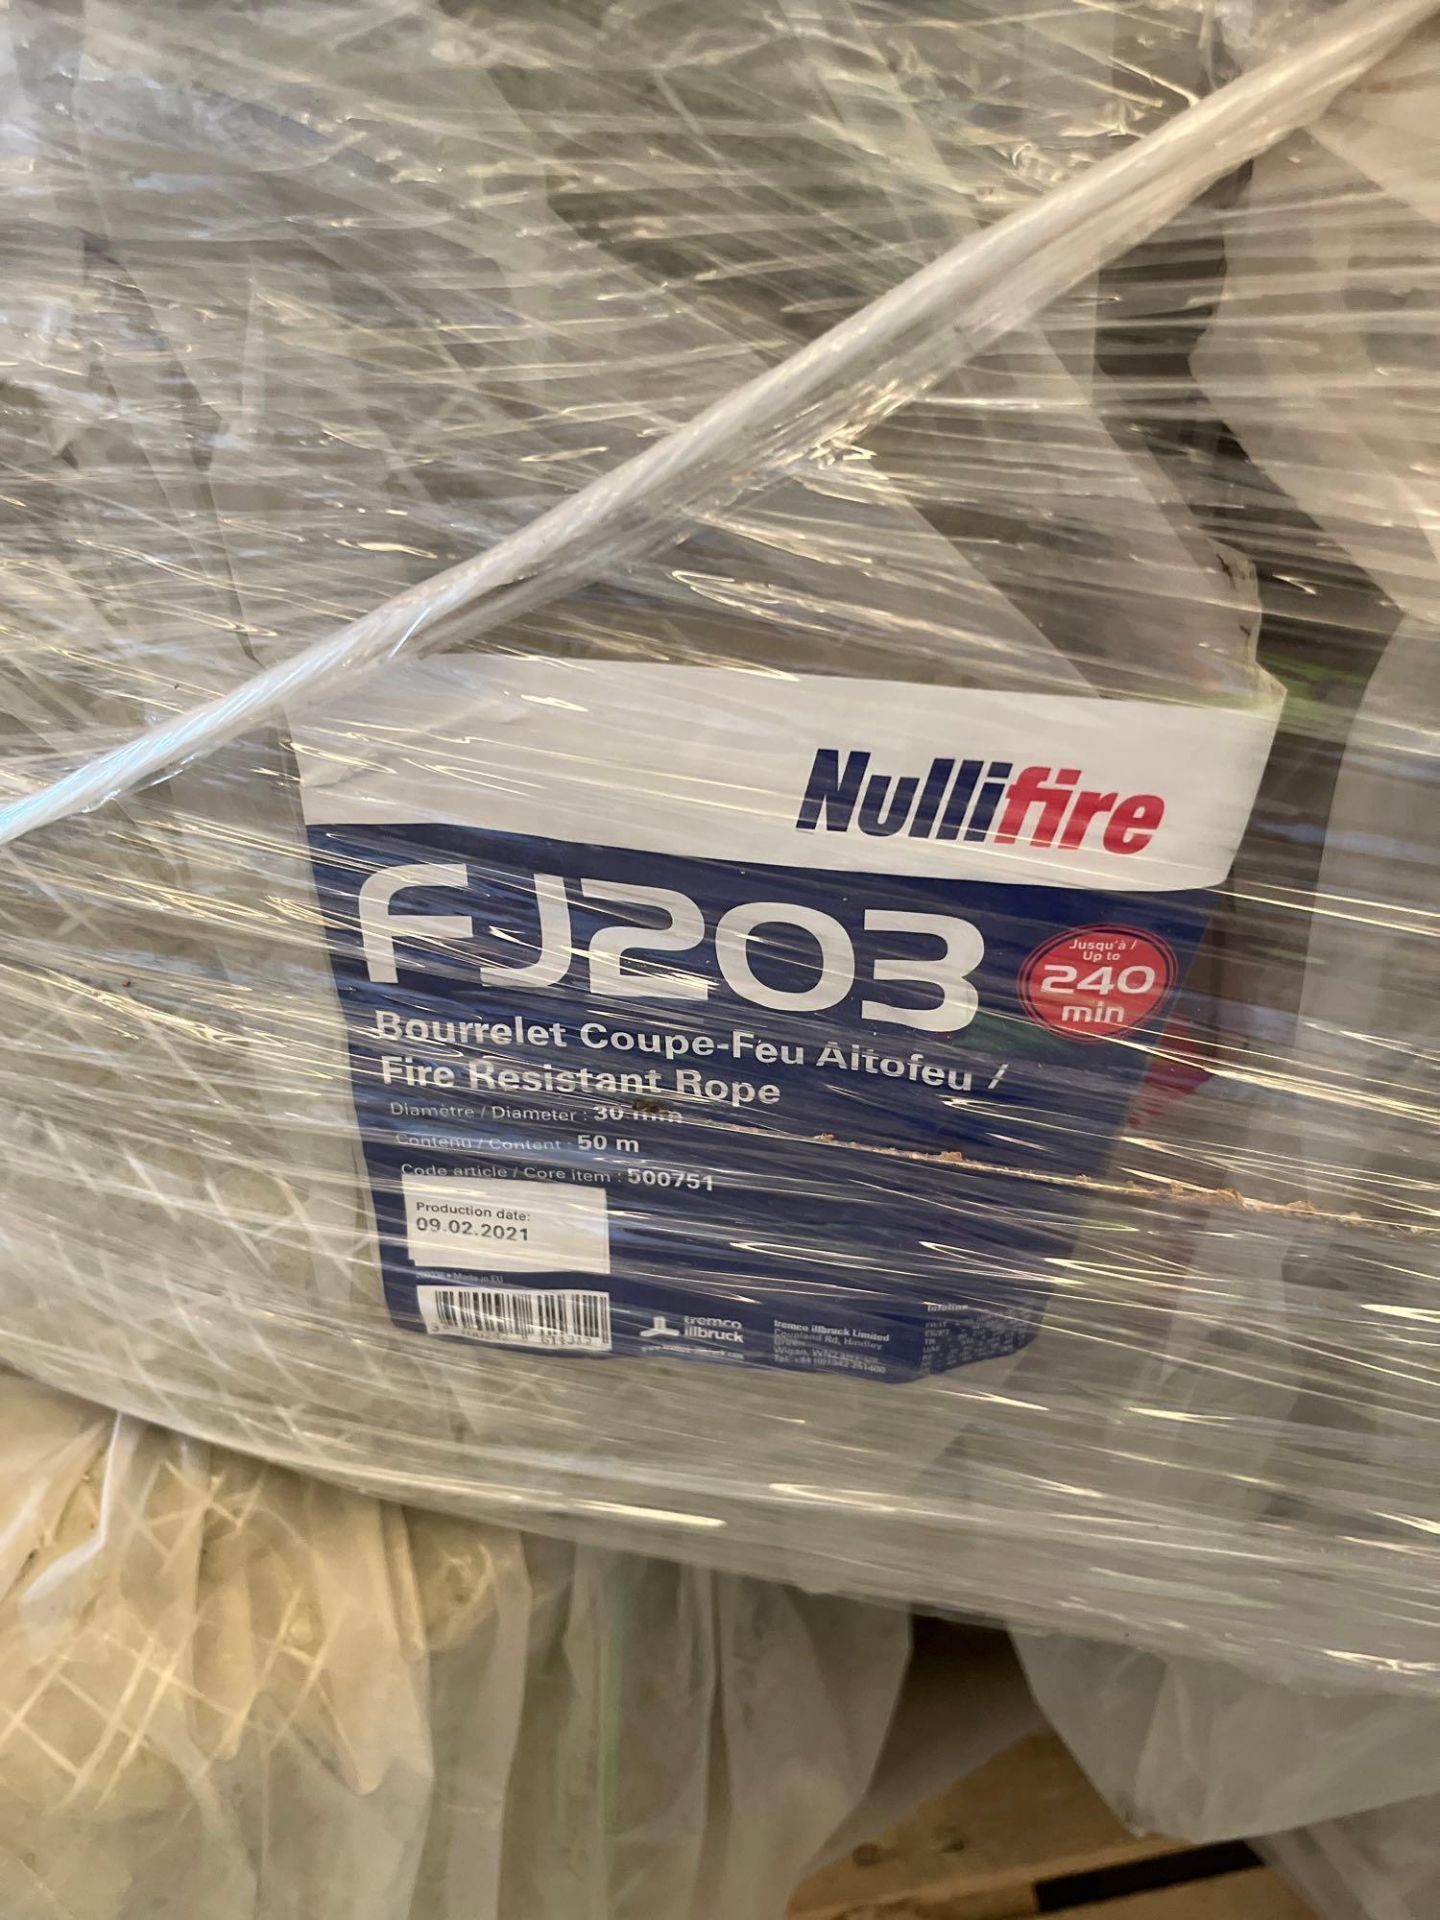 Quantity of 10 Nullifire FJ203 Fire Resistant Rope 30mm x 50m - Image 2 of 2